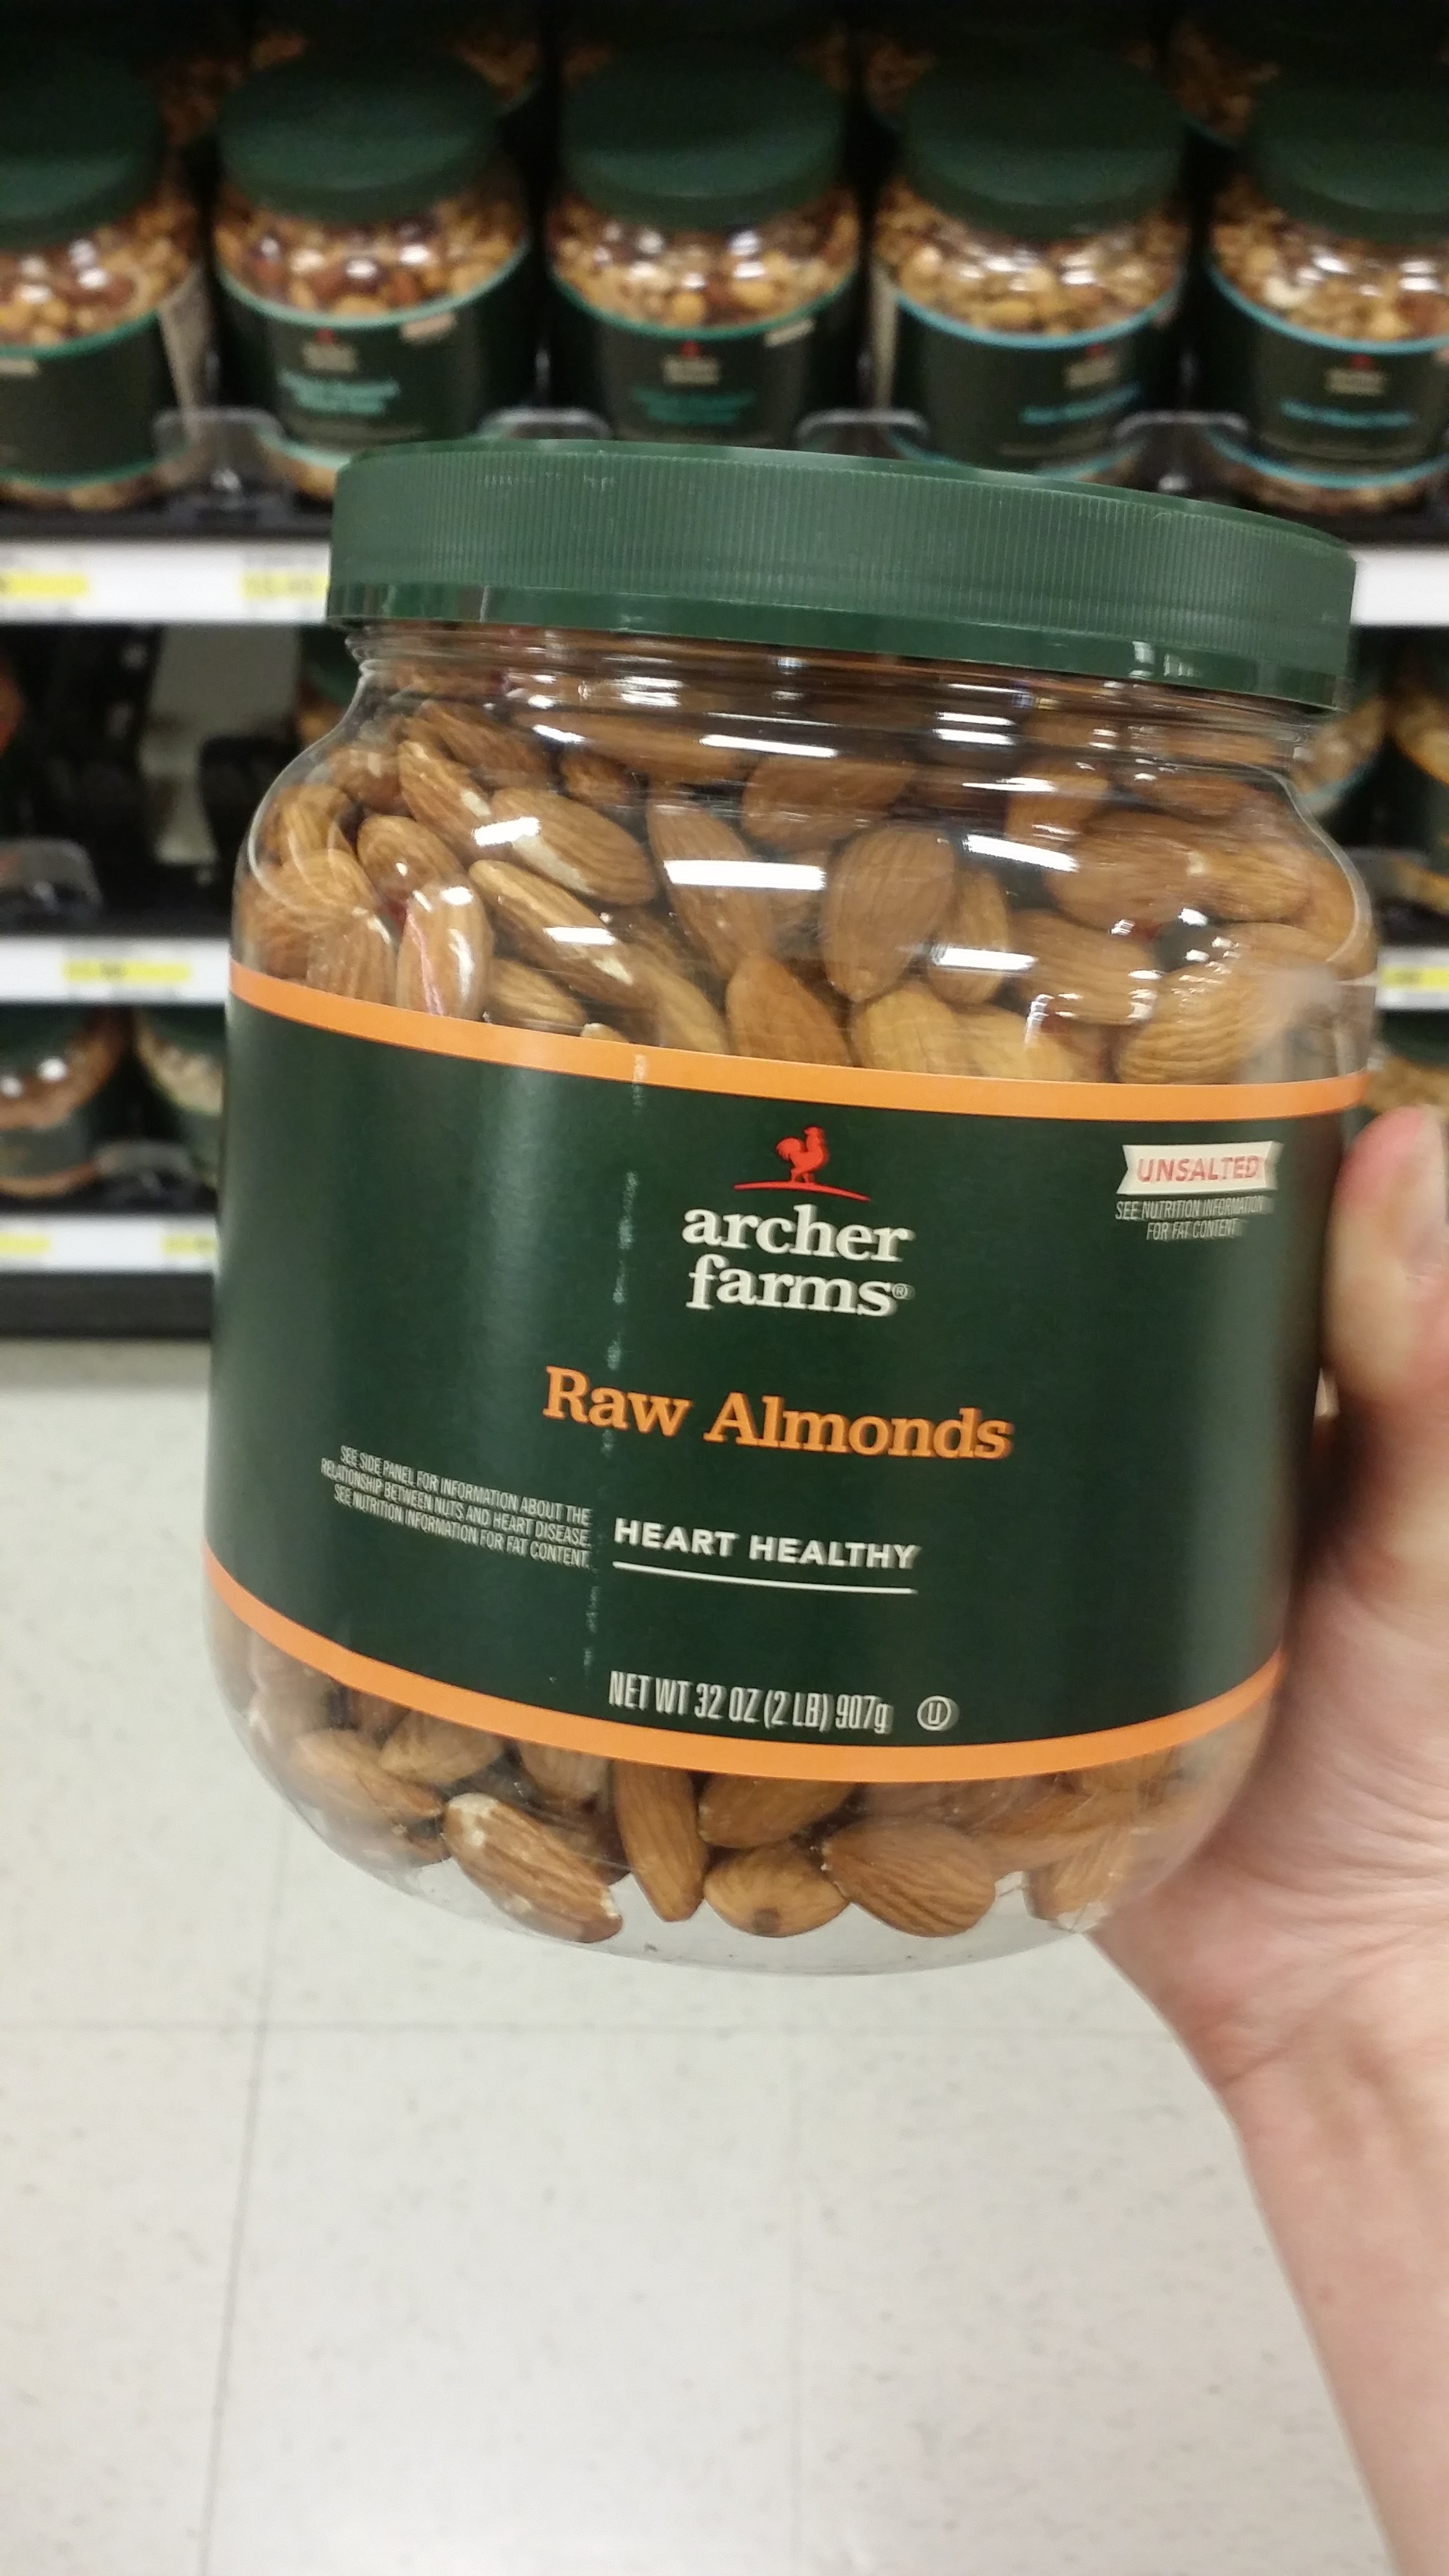  The giant jug of almonds I found. They come in plastic number one, but it would be a great jar to reuse especially in the jar for holding all sorts of nuts and bolts.&nbsp; 